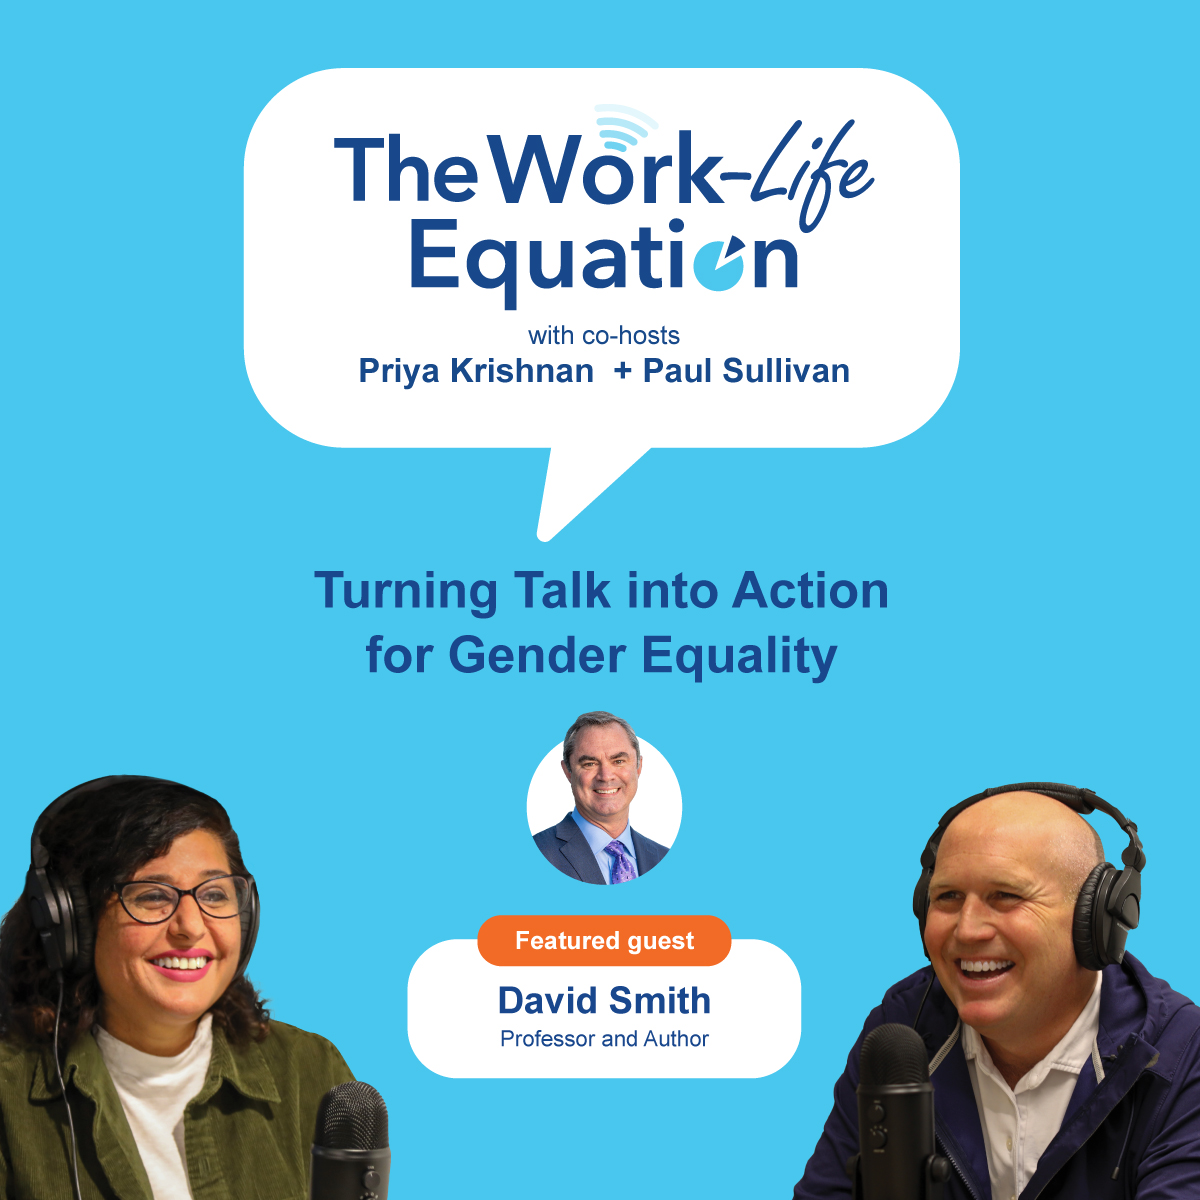 The Work-Life Equation episode 3